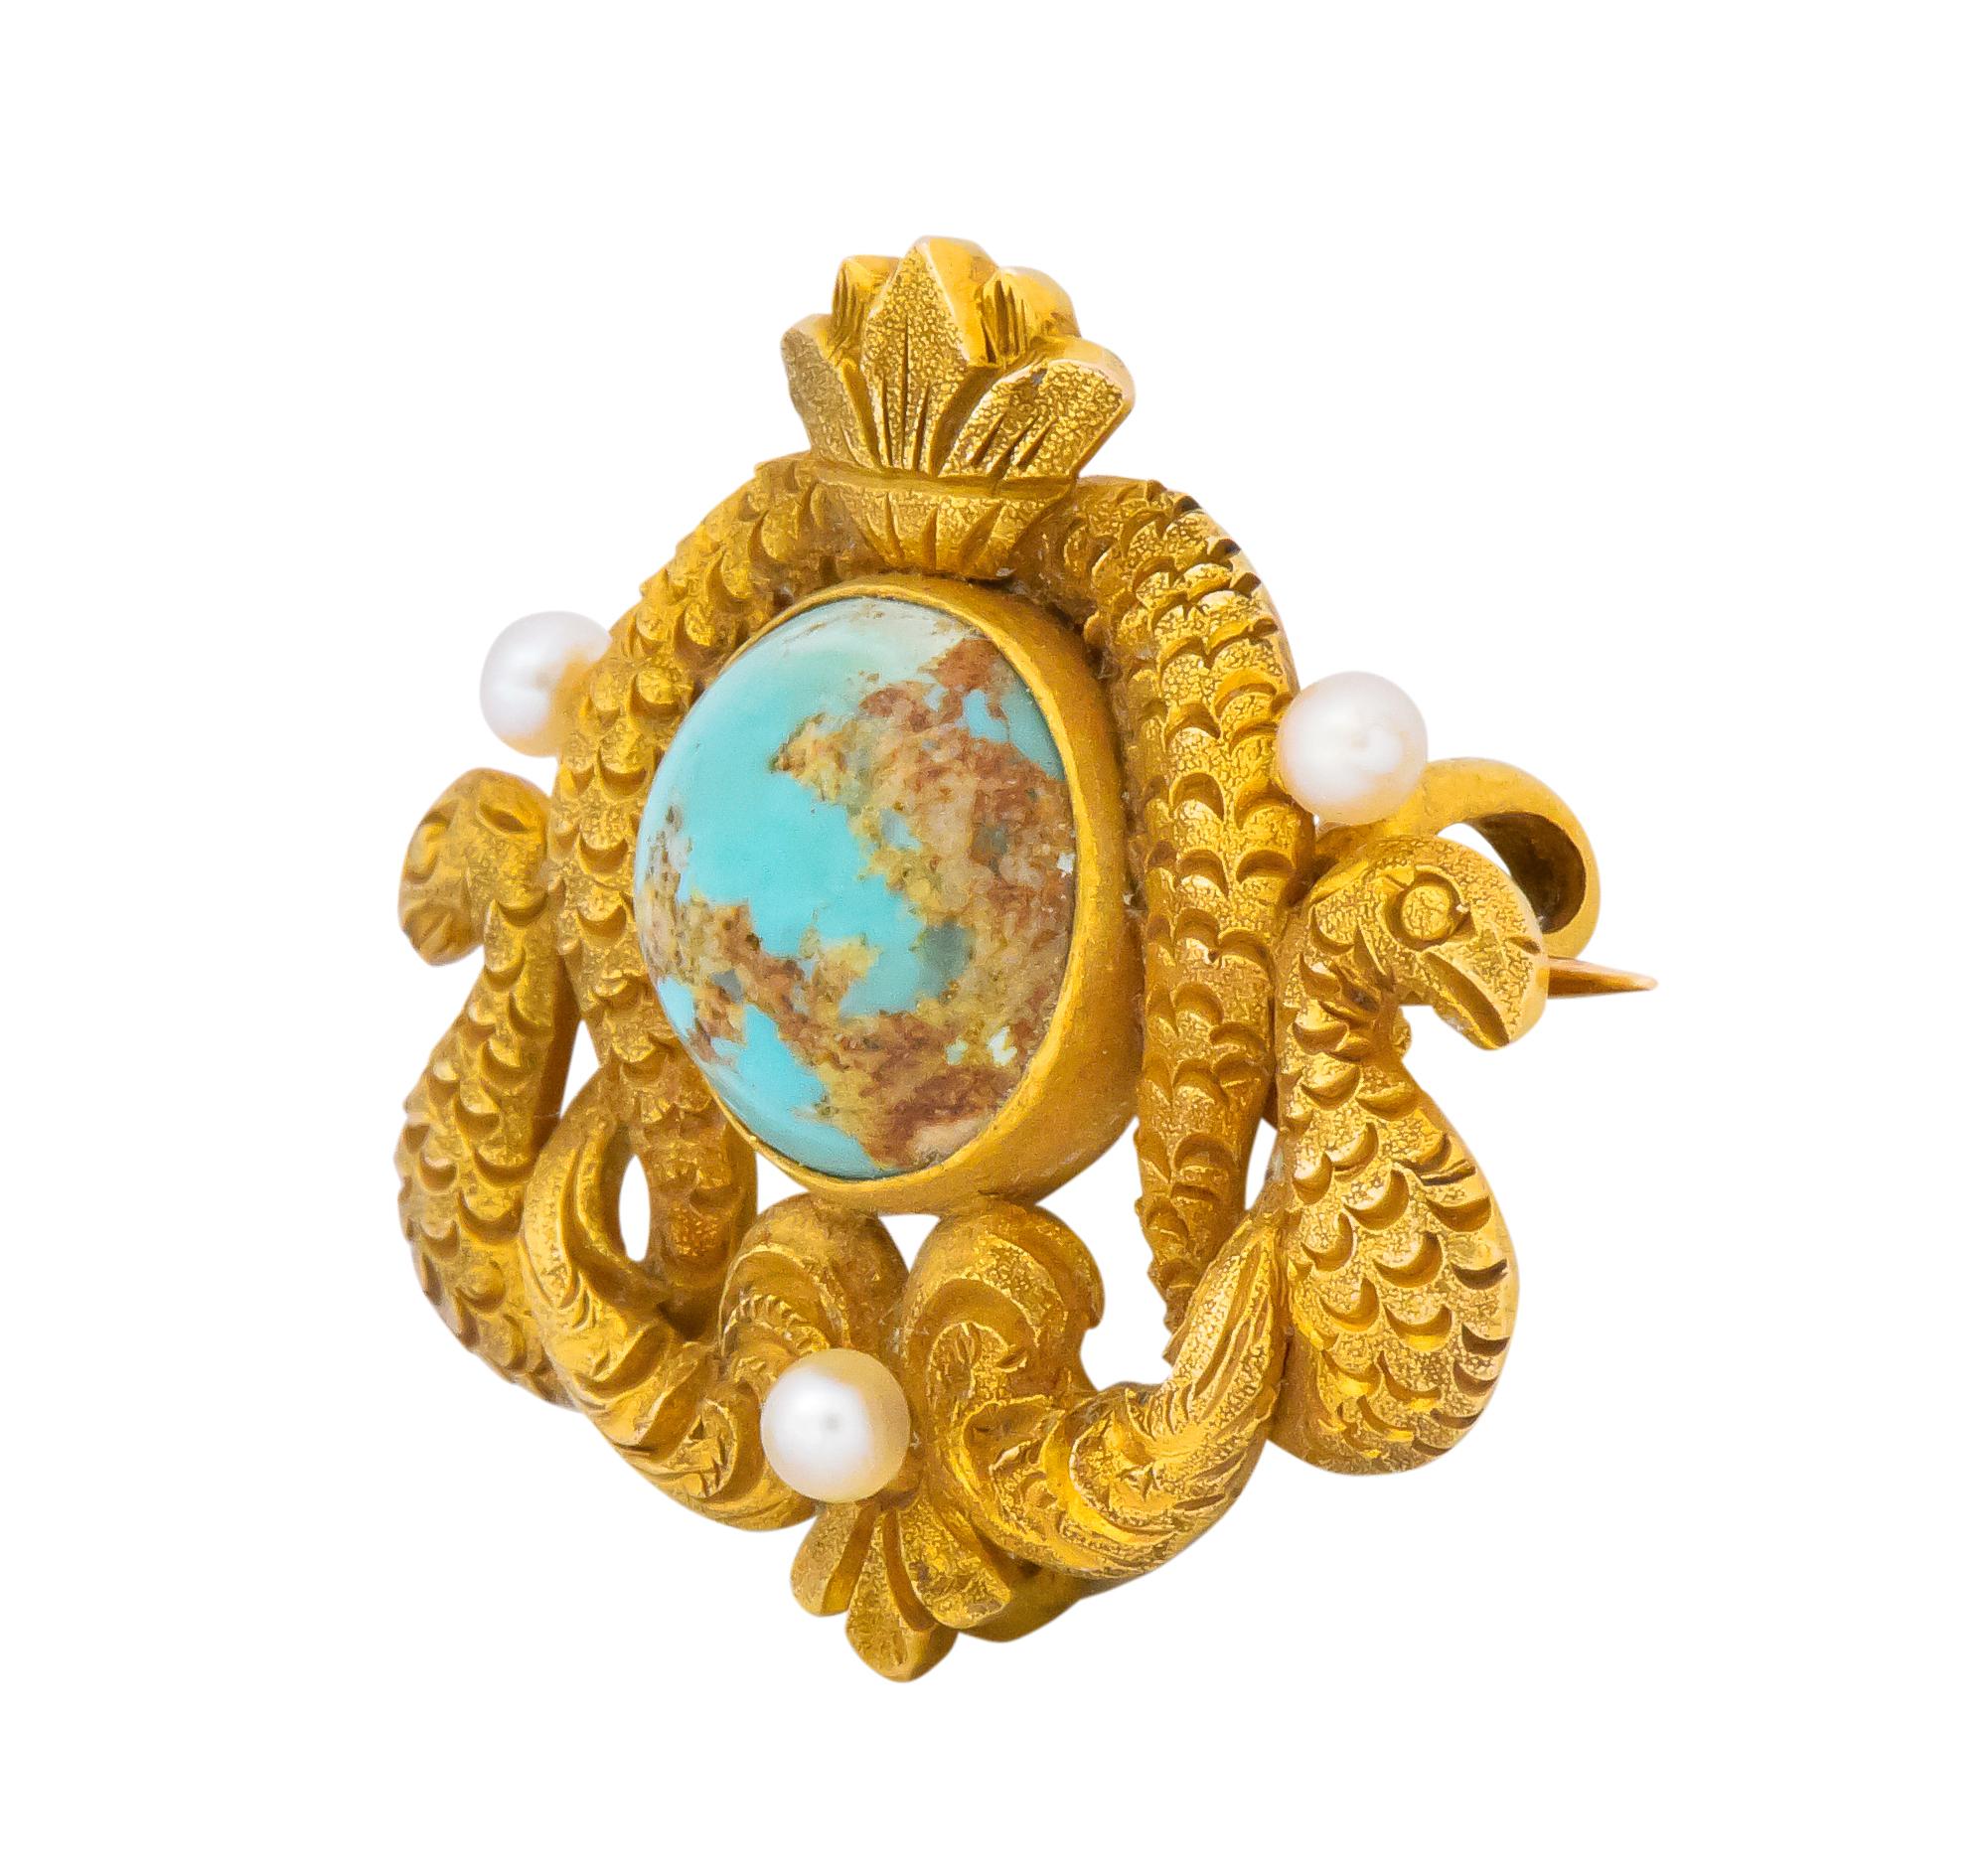 Centering a round cabochon turquoise, measuring approximately 9.0 mm, with visible matrix and greenish blue

Accented with tiny seed pearls, very well matched

With highly detailed and textured gold serpent and floral motif

Pin stem and hook for a